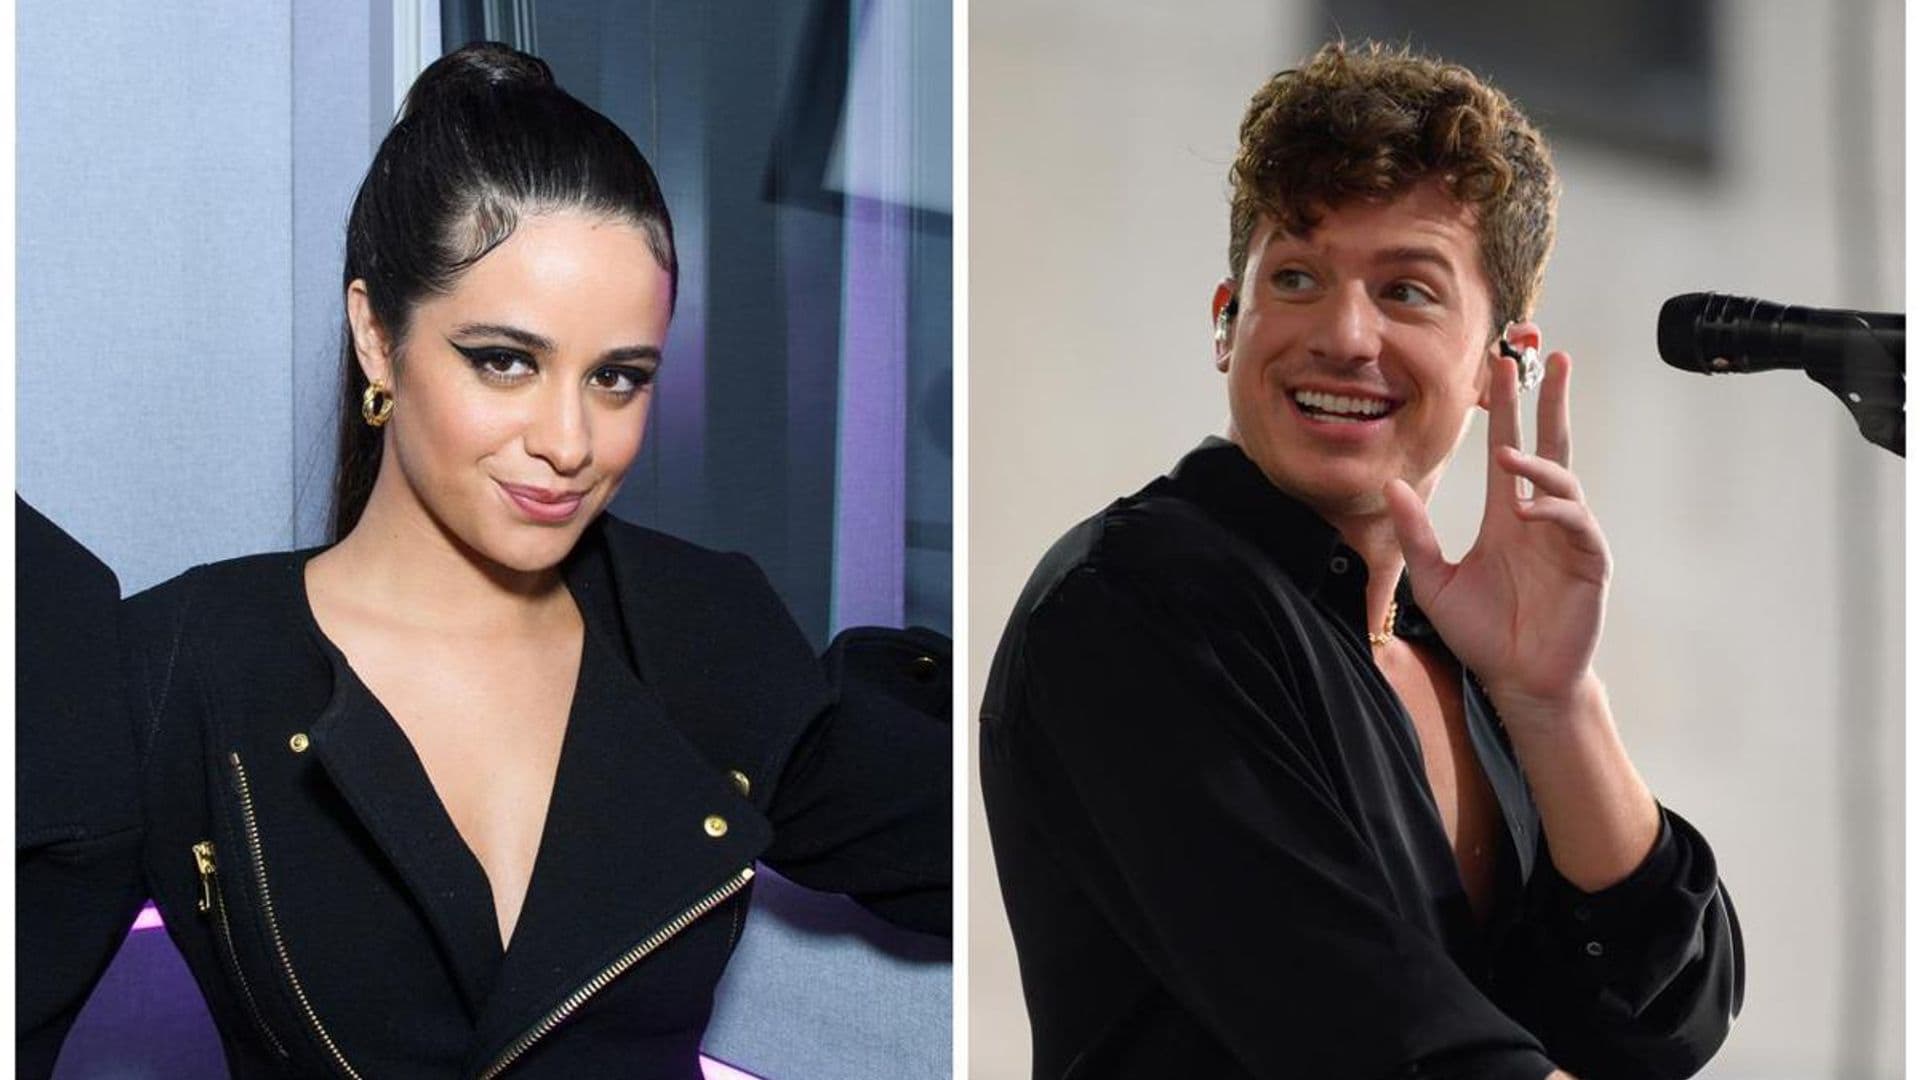 Camila Cabello appoints Charlie Puth as her Battle Advisor in 'The Voice'